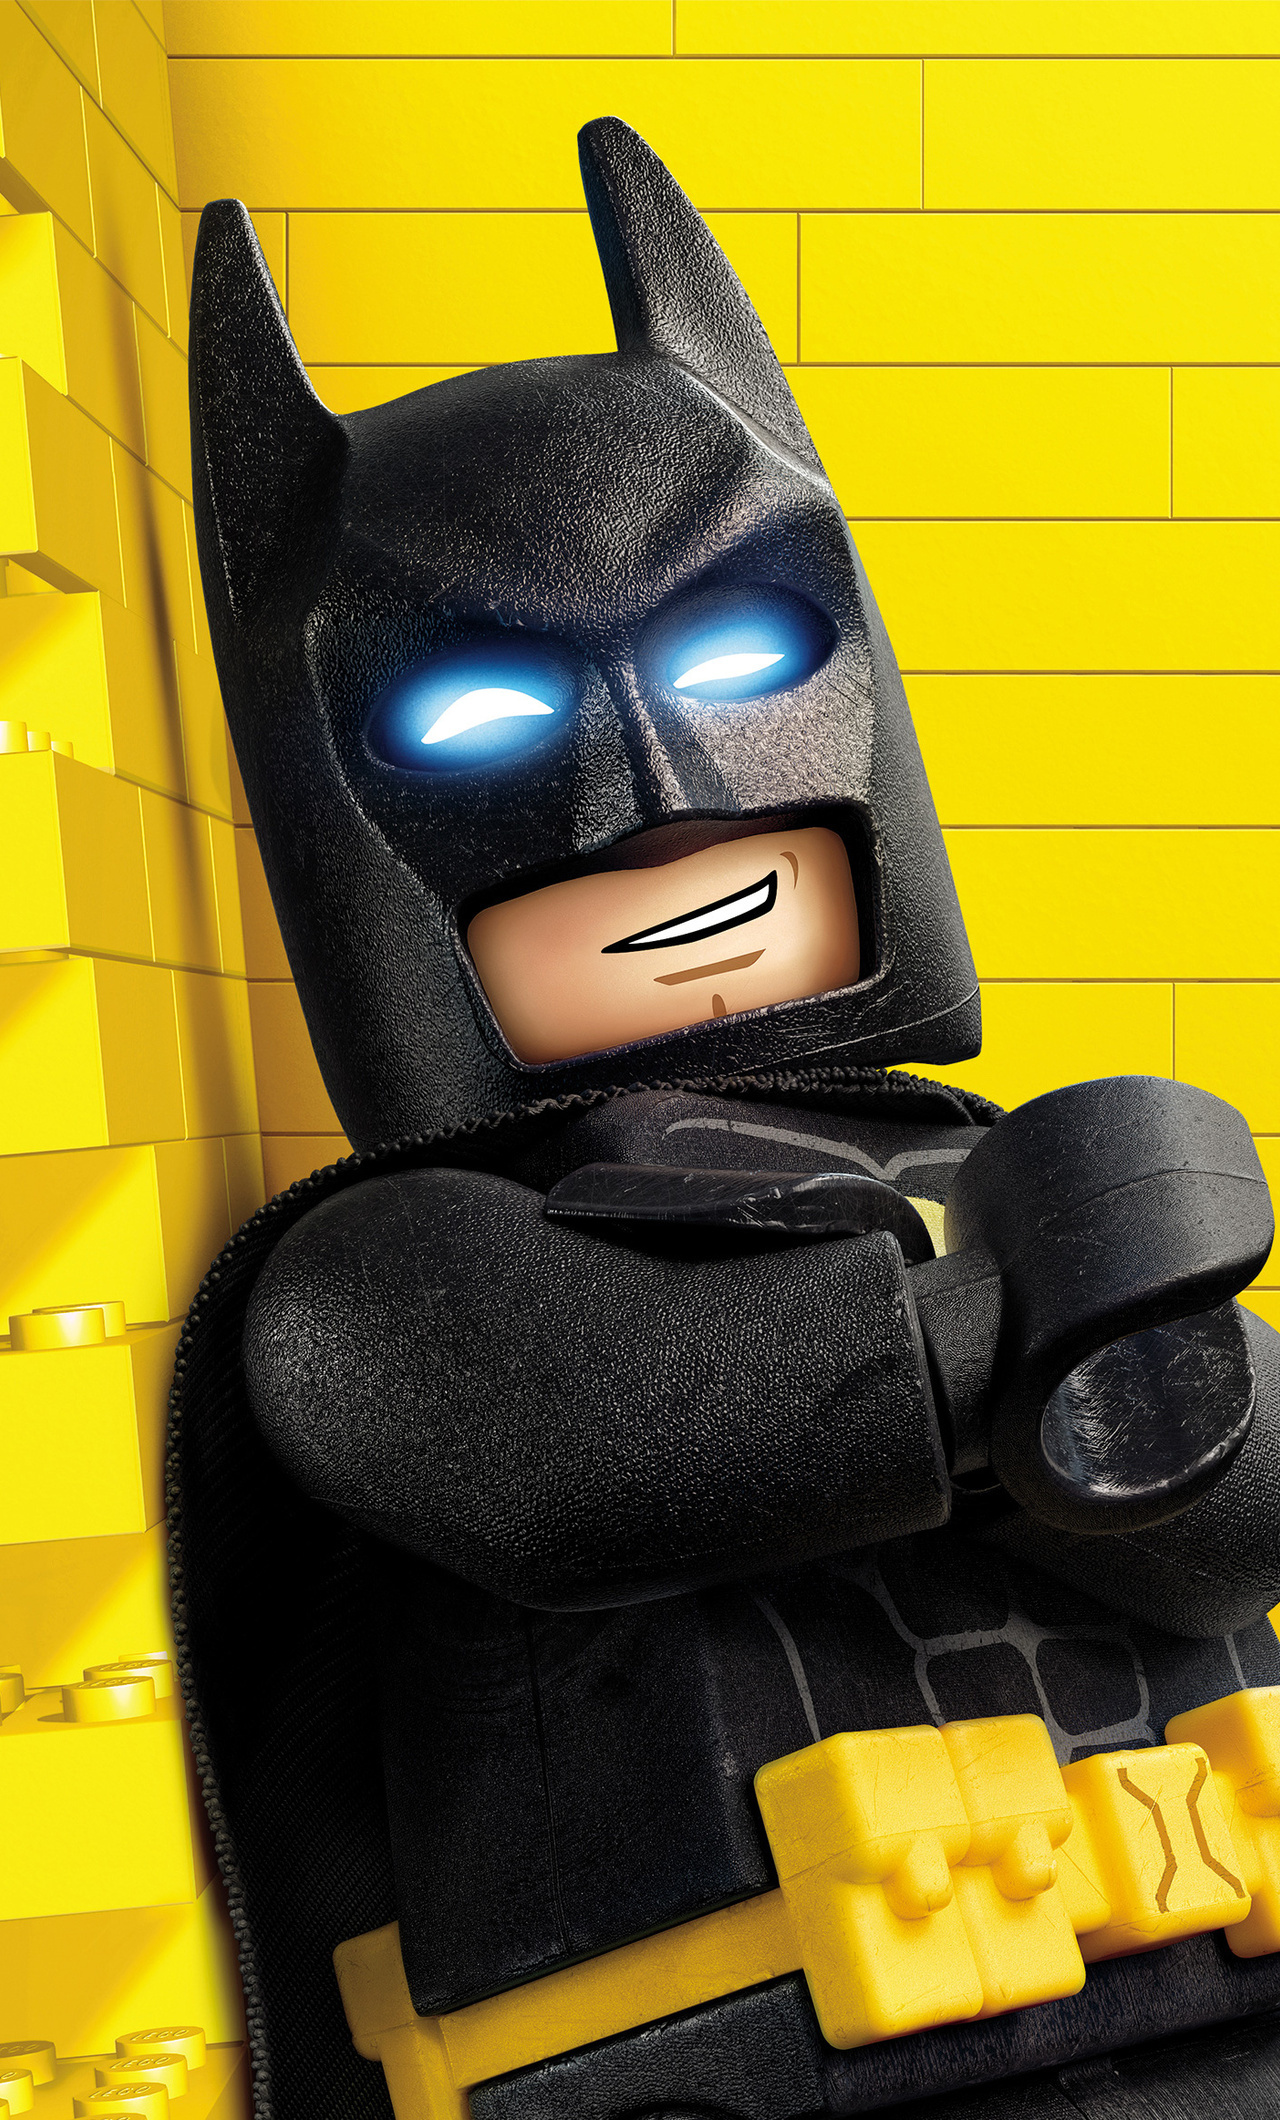 Lego Batman Movie on iPhone 6, 4K wallpapers, Stunning backgrounds, HD quality, 1280x2120 HD Handy